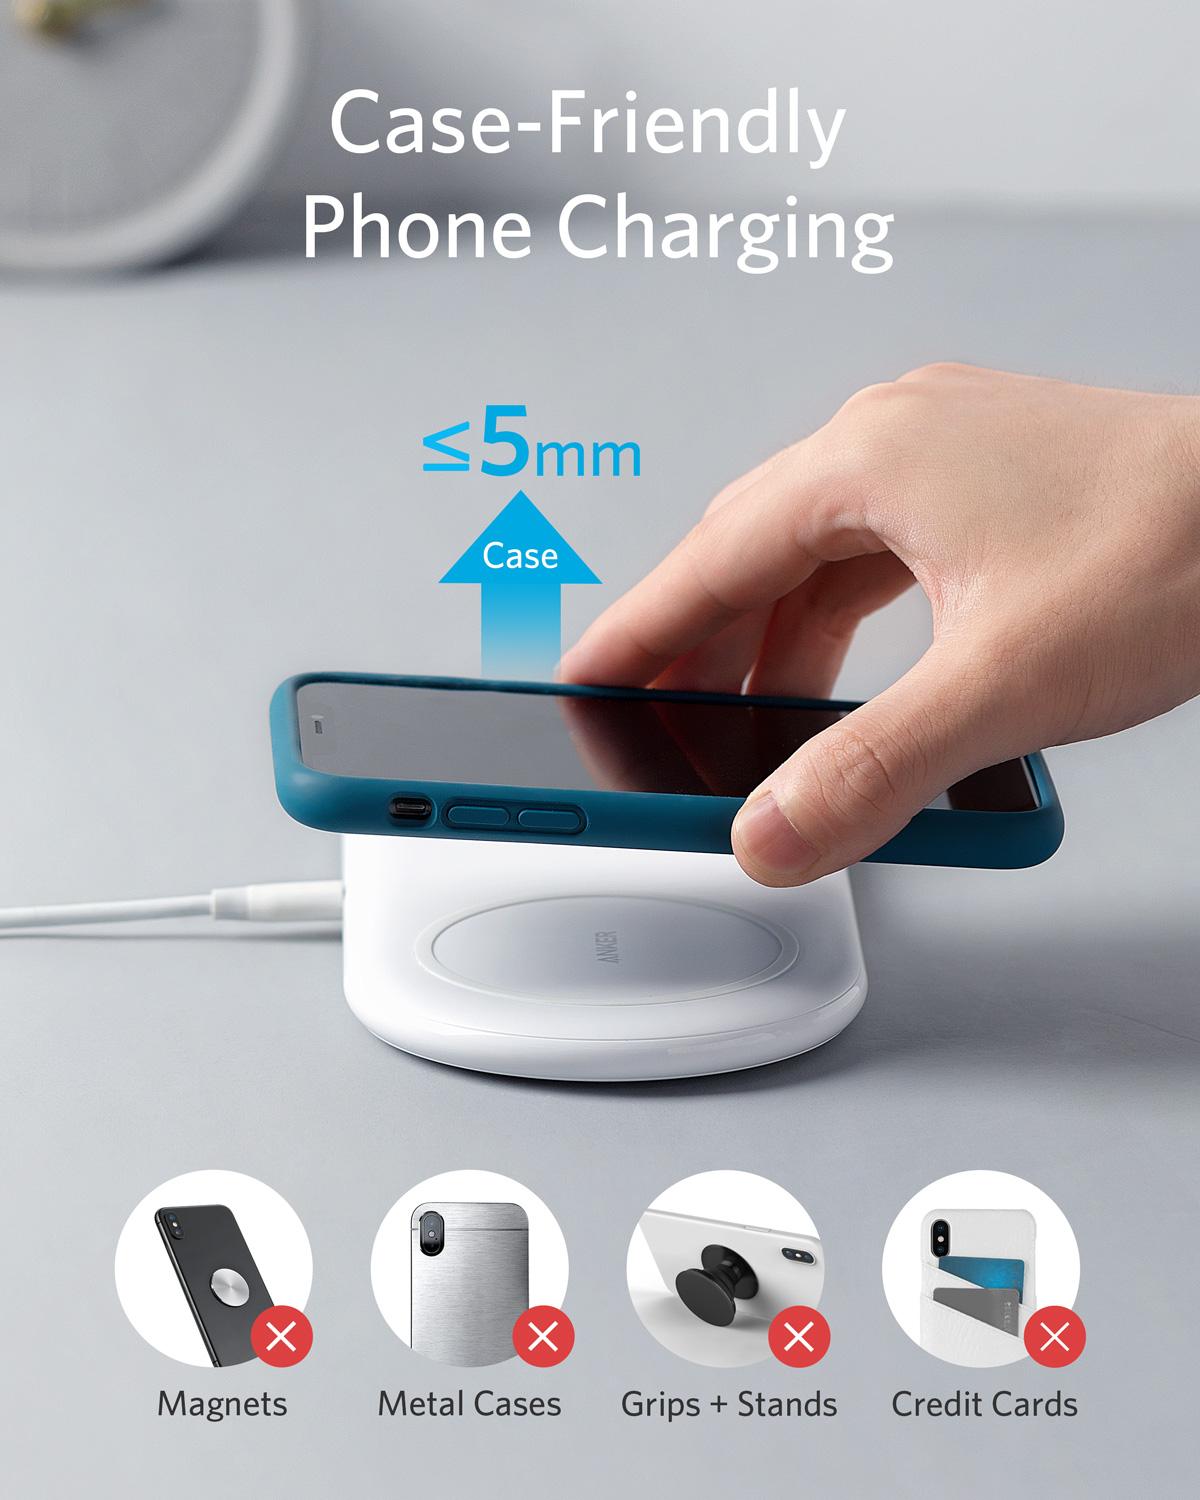 Anker Wireless Charging Station, 2 in 1 PowerWave+ Pad with Holder for Apple Watch 5/4/3/2, Wireless Charger for iPhone 11, Pro,